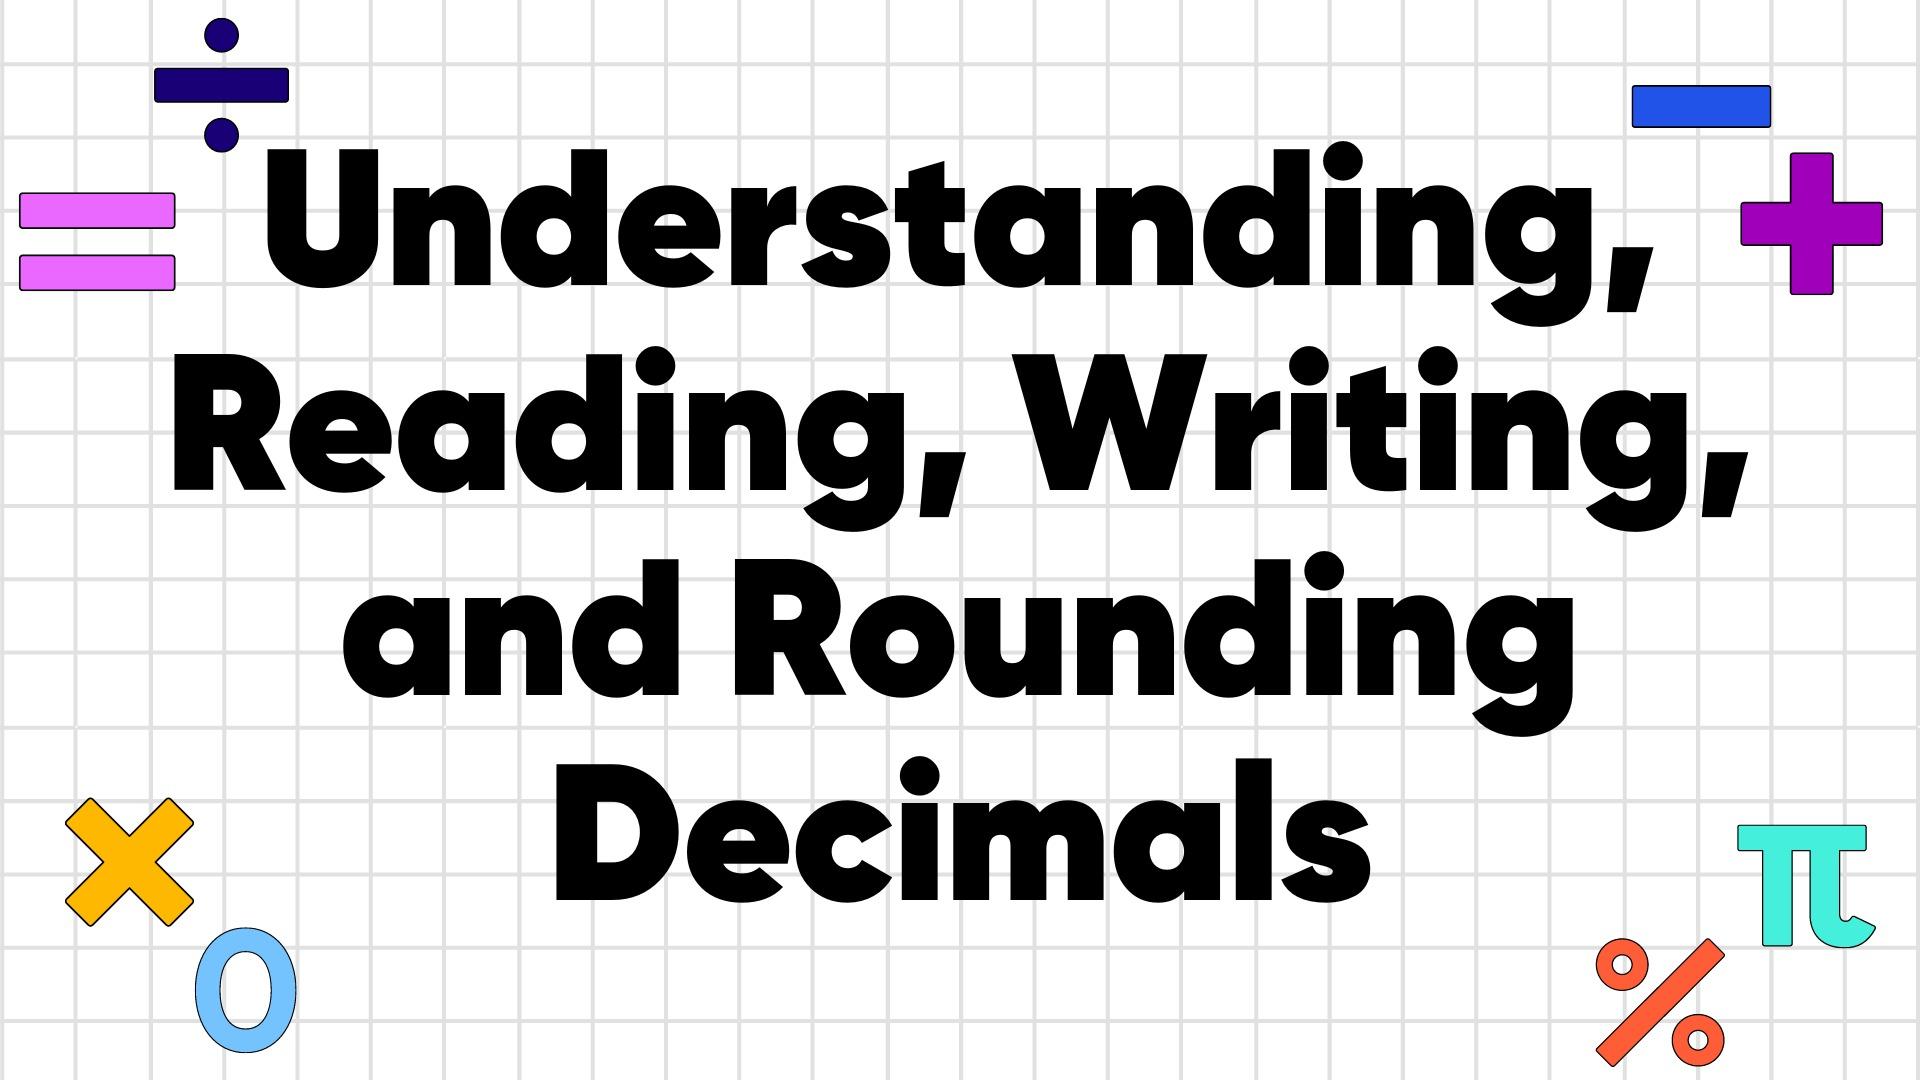 Learn How To Understand, Read, Write, and Round Decimals in Math